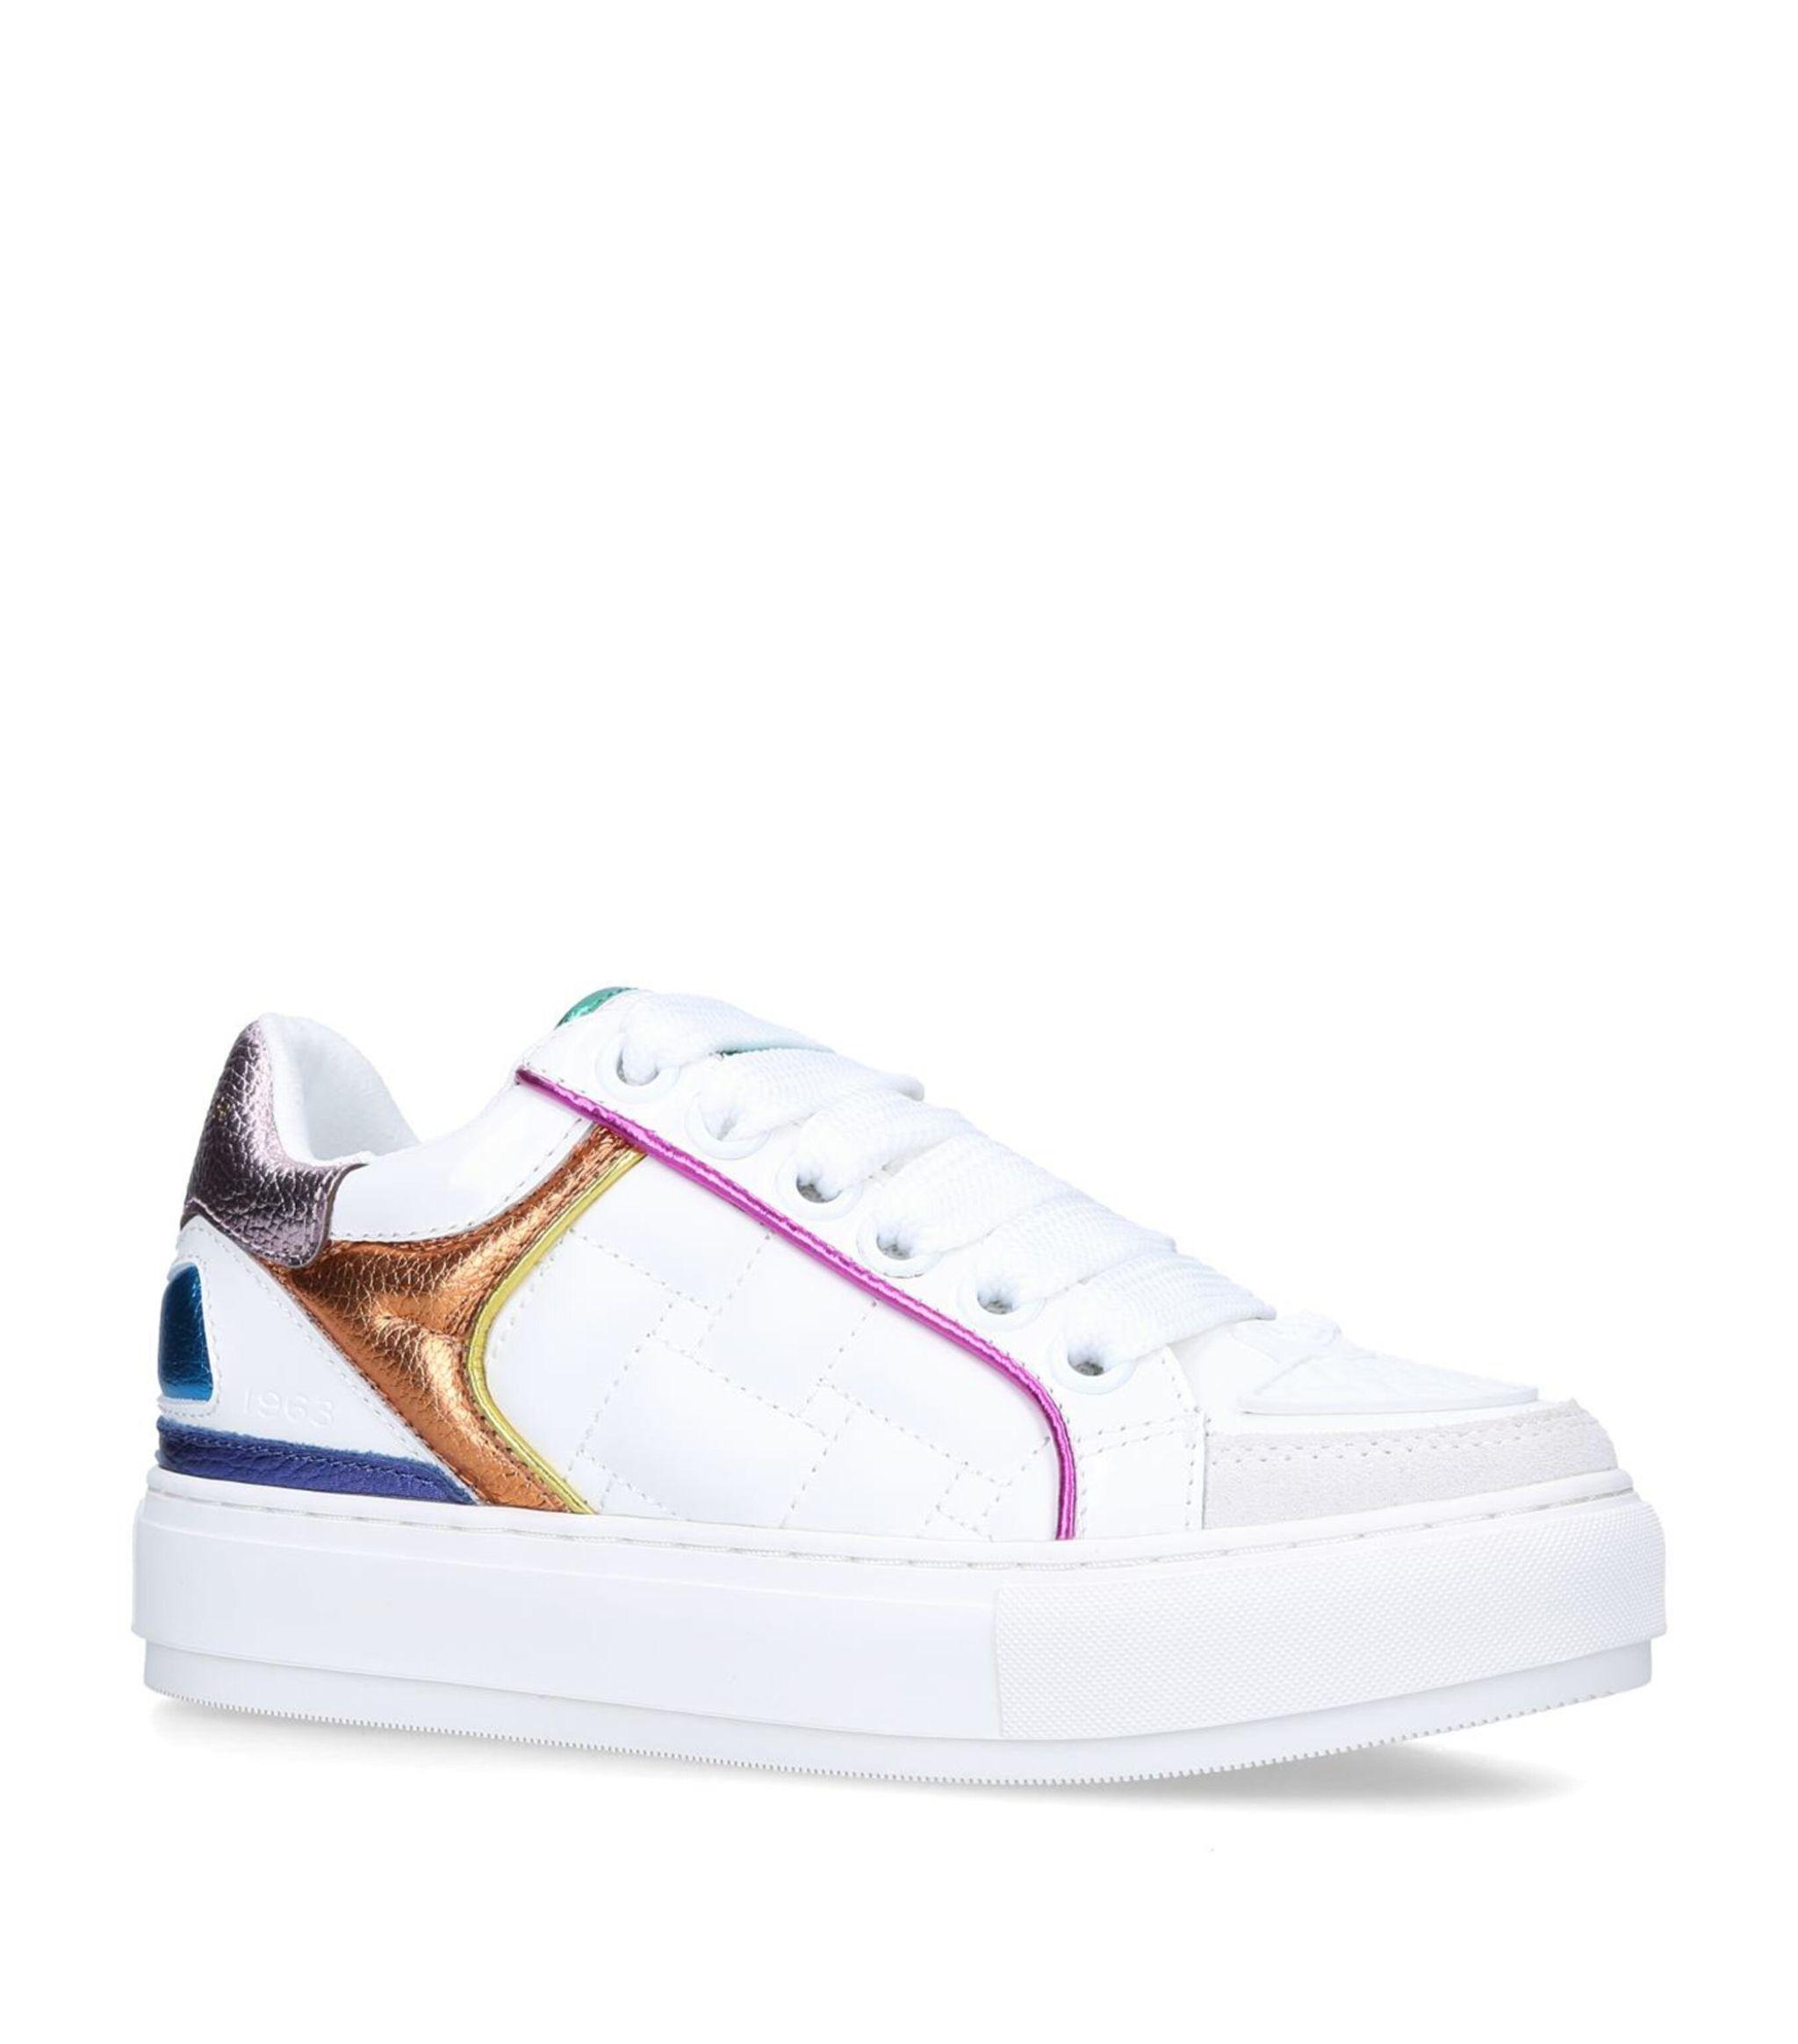 Kurt Geiger Leather Southbank Sneakers in White | Lyst